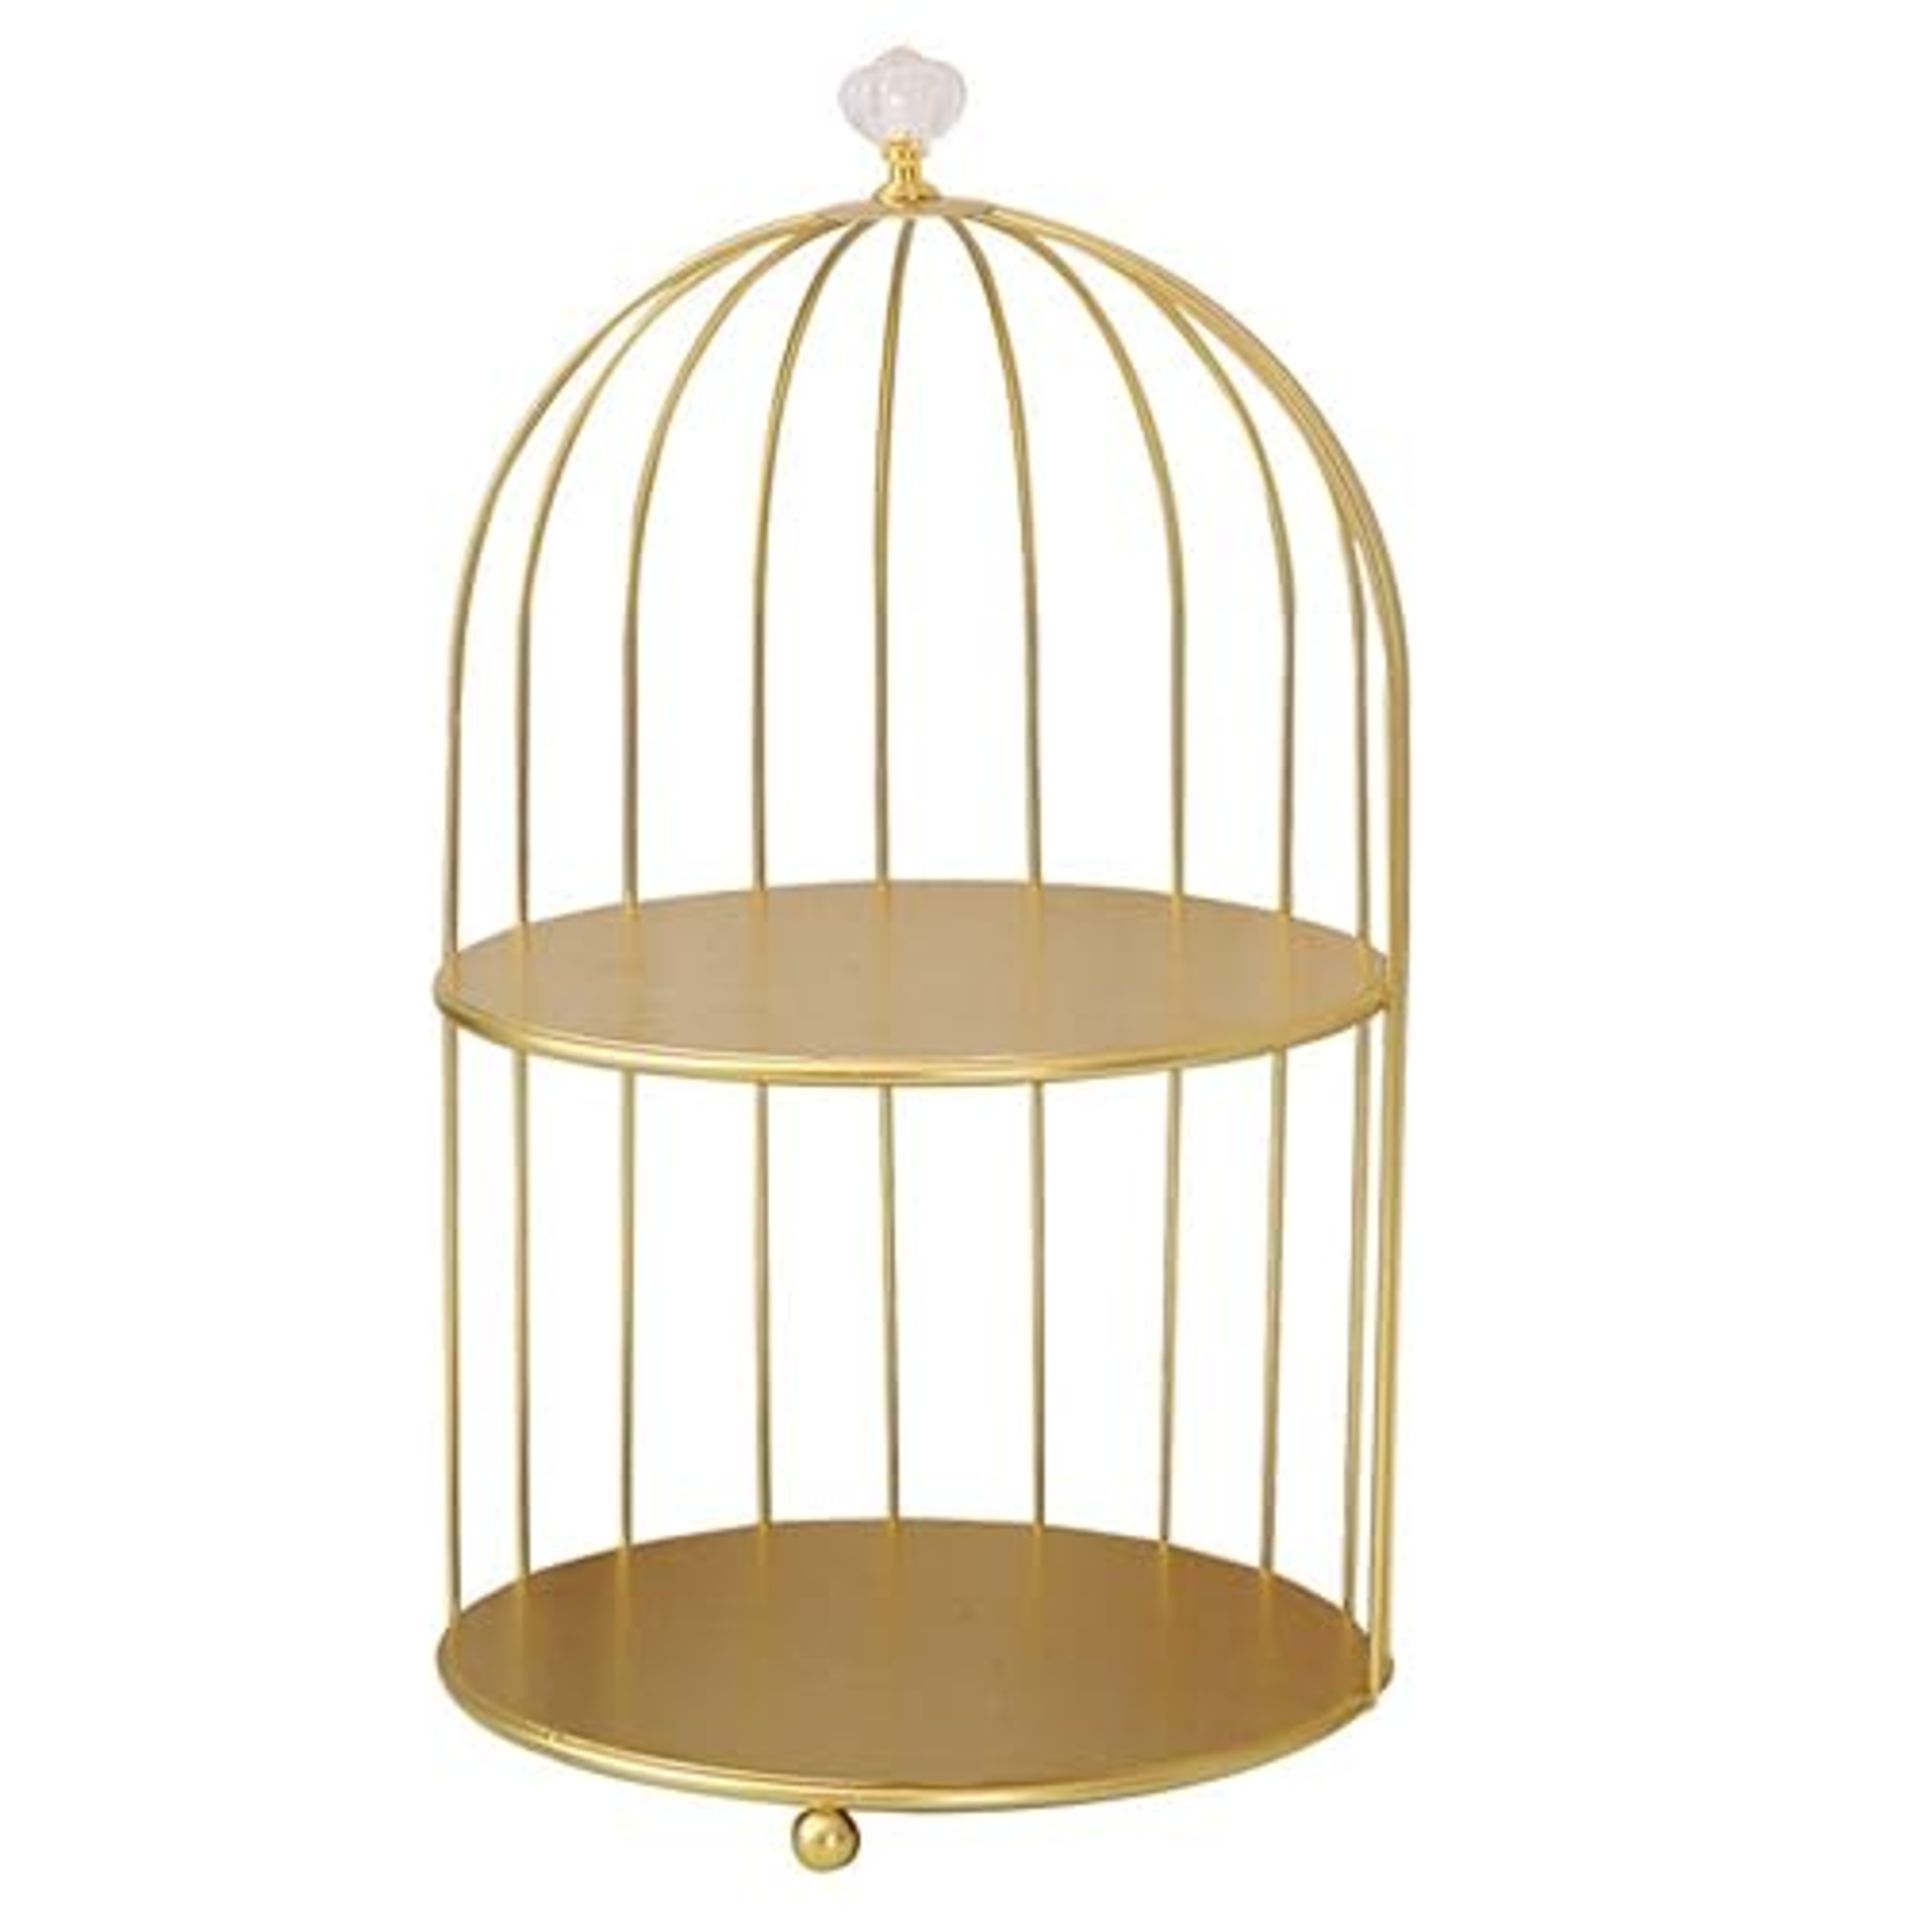 DOITOOL Metal Cupcake Stand 2- Tier Gold Cake Stands with Bird Cage Shaped for Party Dessert Fruits